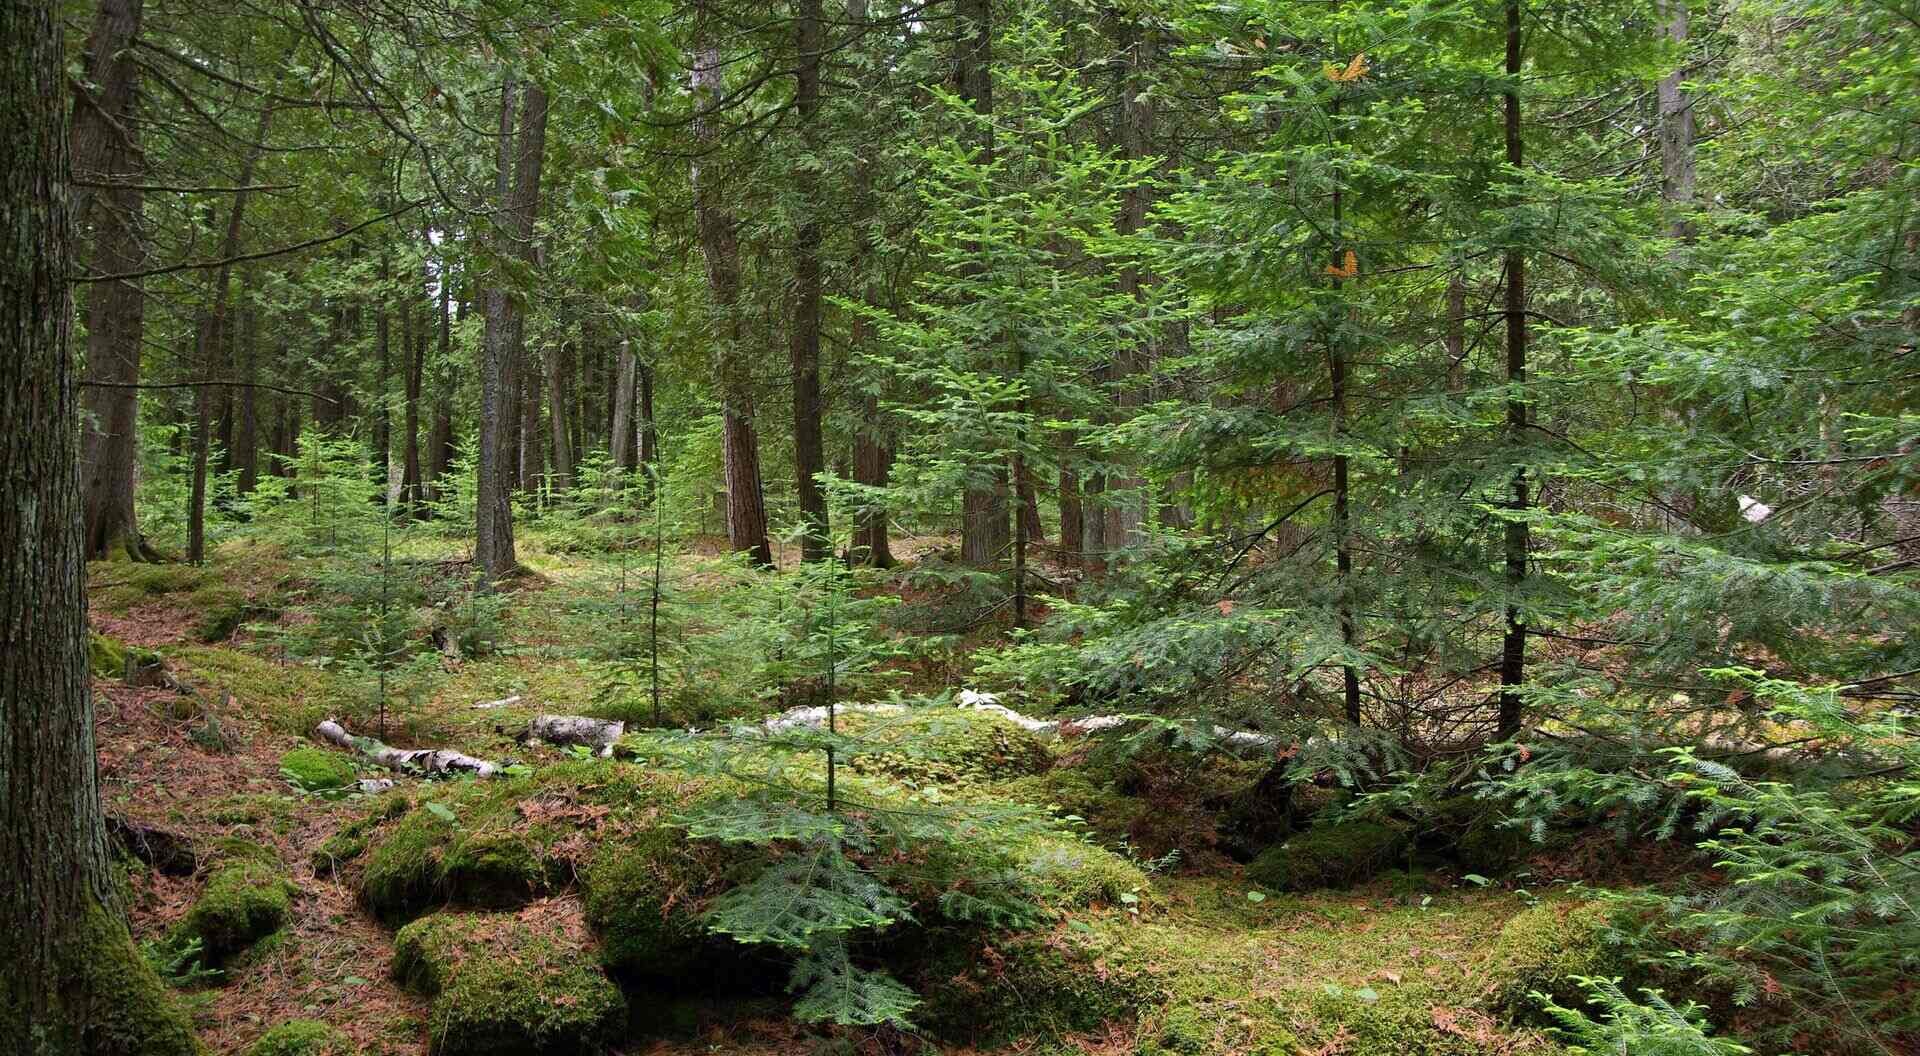 How Does The Ground Cover Change From The Boreal Forest To The Rocky Mountains